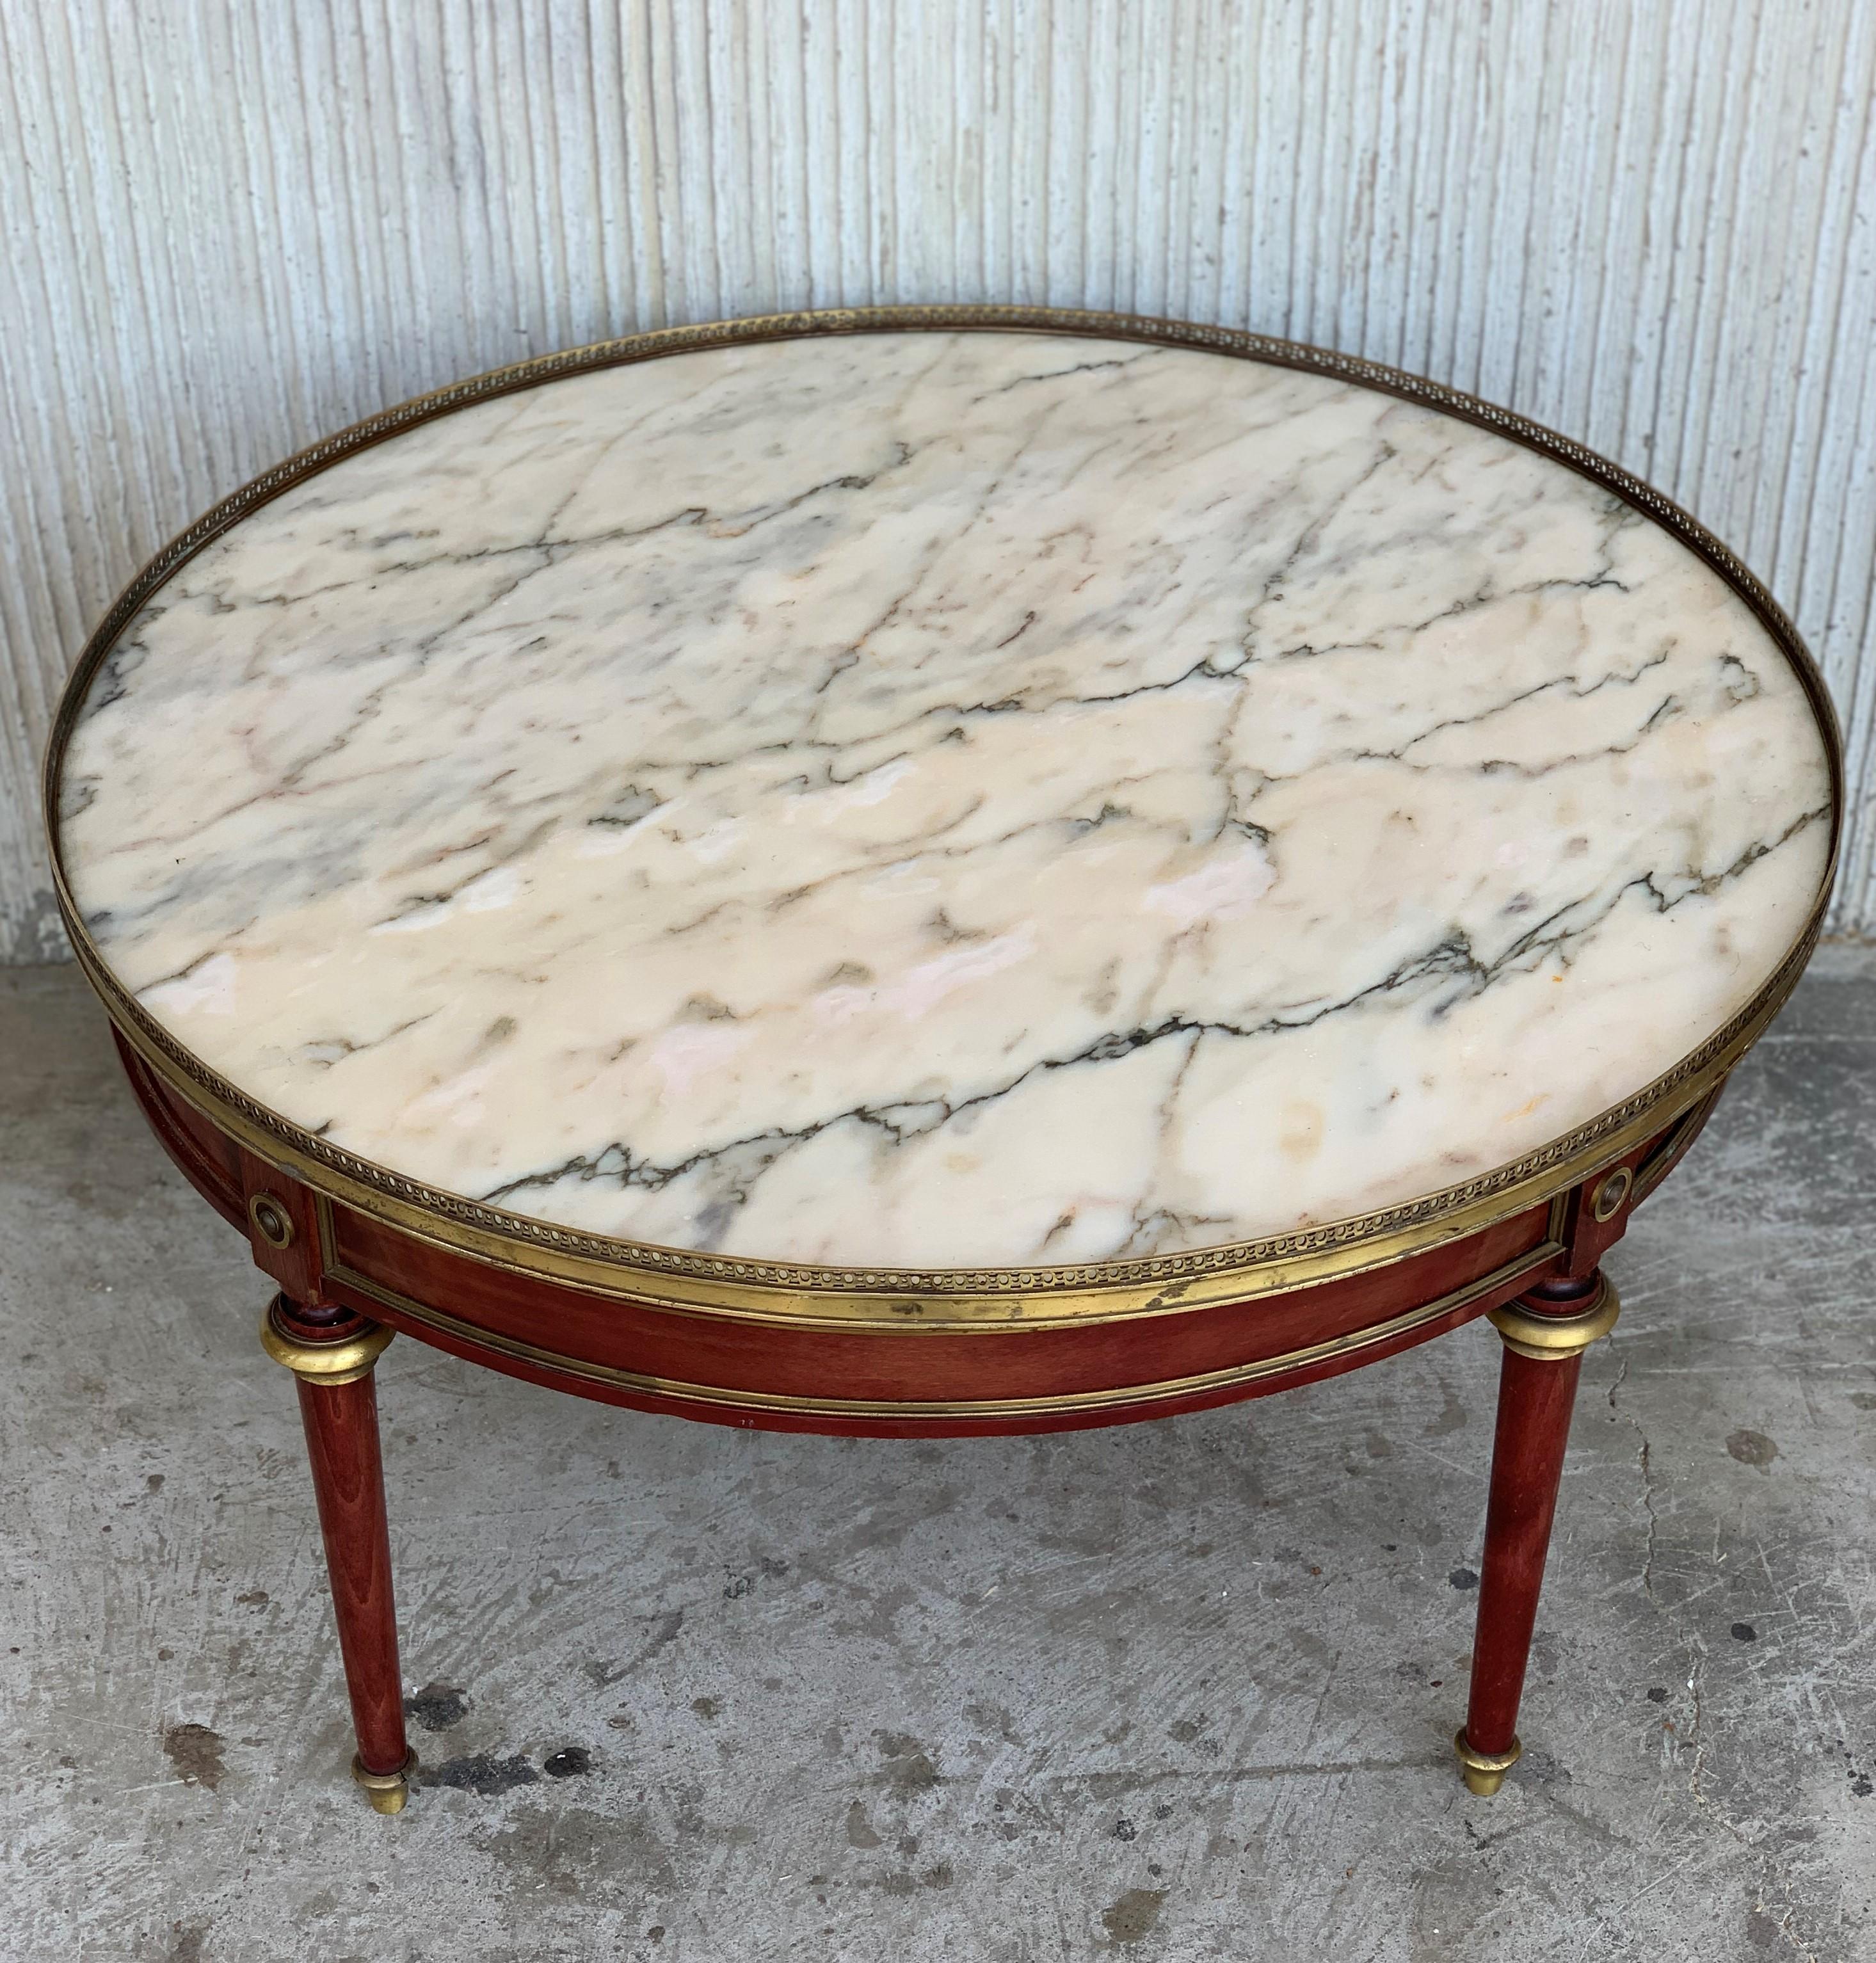 Spanish Louis XV Style Mahogany and Marble-Top Round Coffee Table with Bronze Mounts